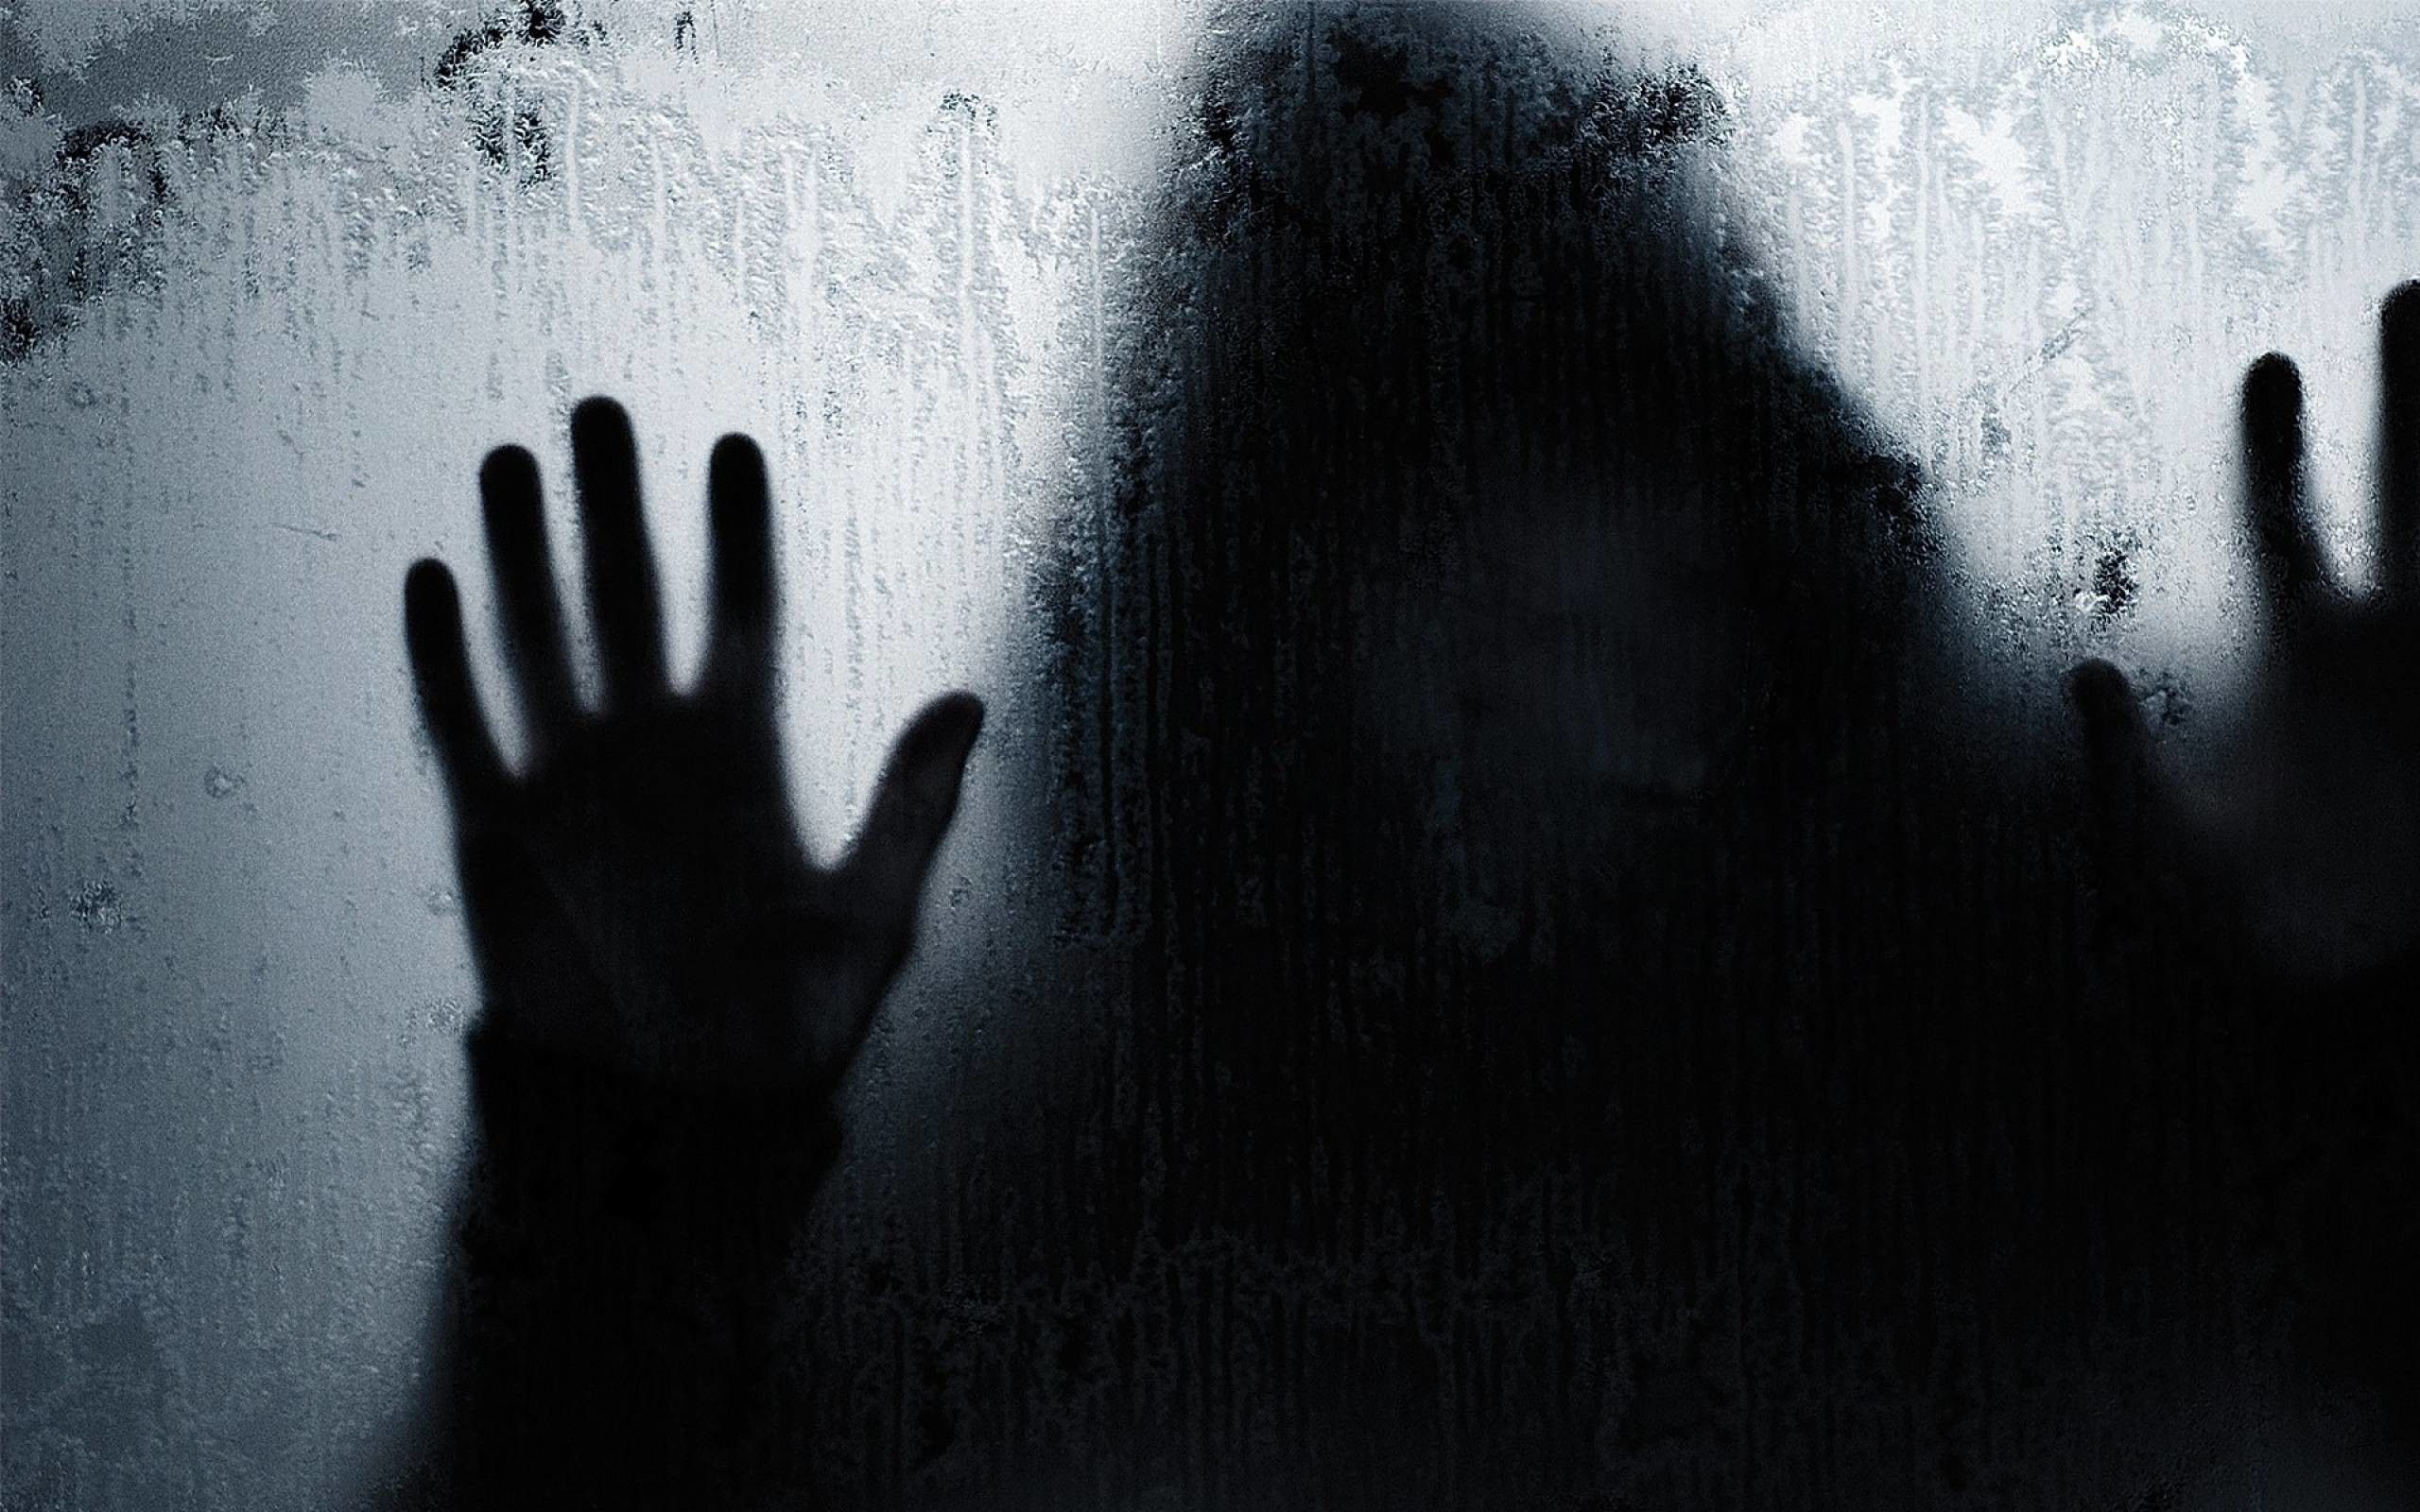 A shadowy figure with hands pressed against a frosted glass window. - Creepy, ghost